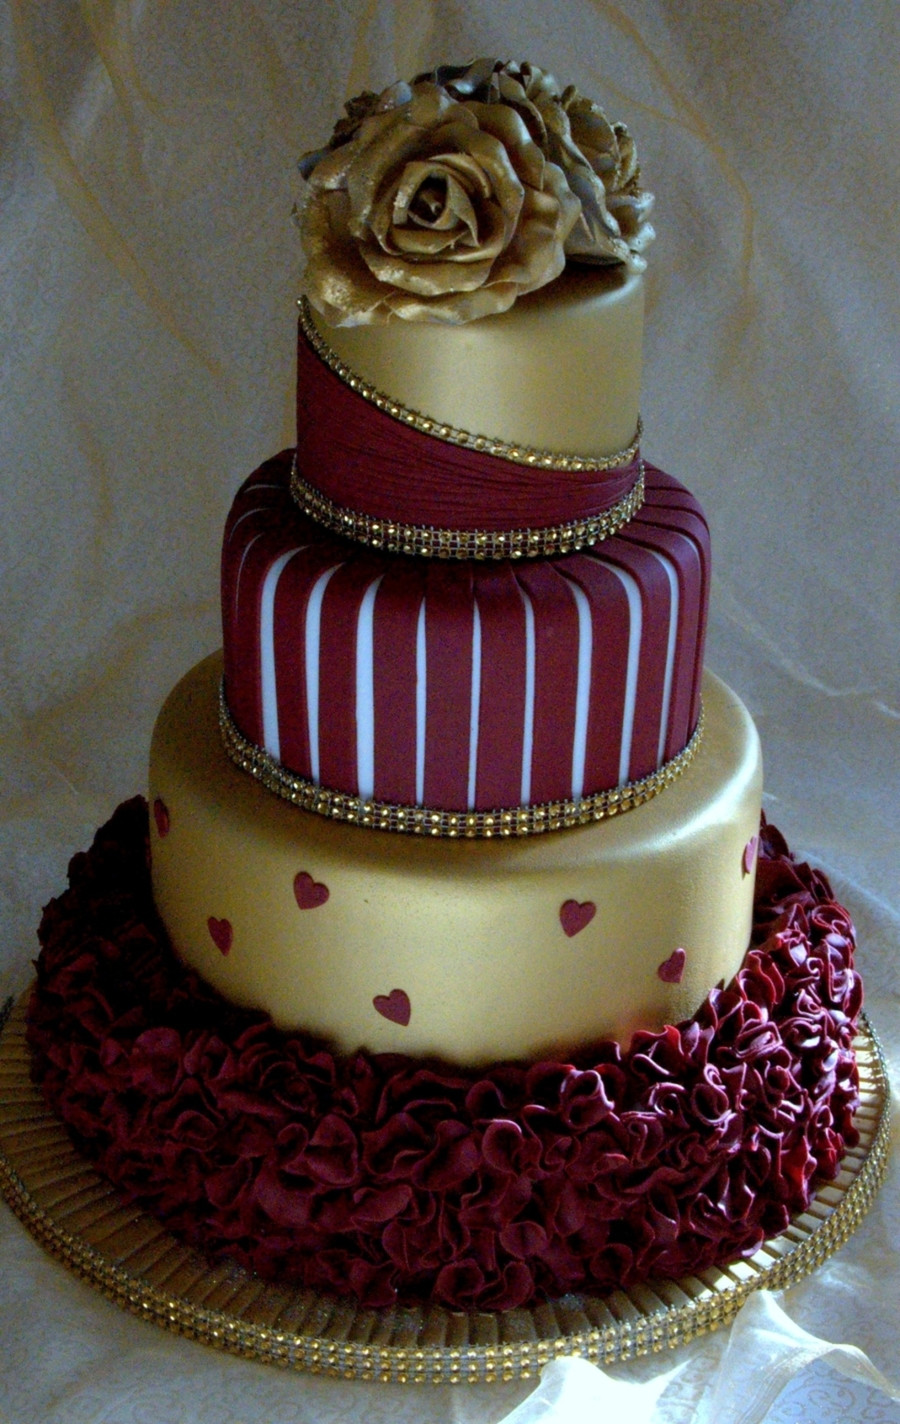 Burgundy Wedding Cakes
 Gold And Burgundy Wedding Cake With Ruffles And Roses